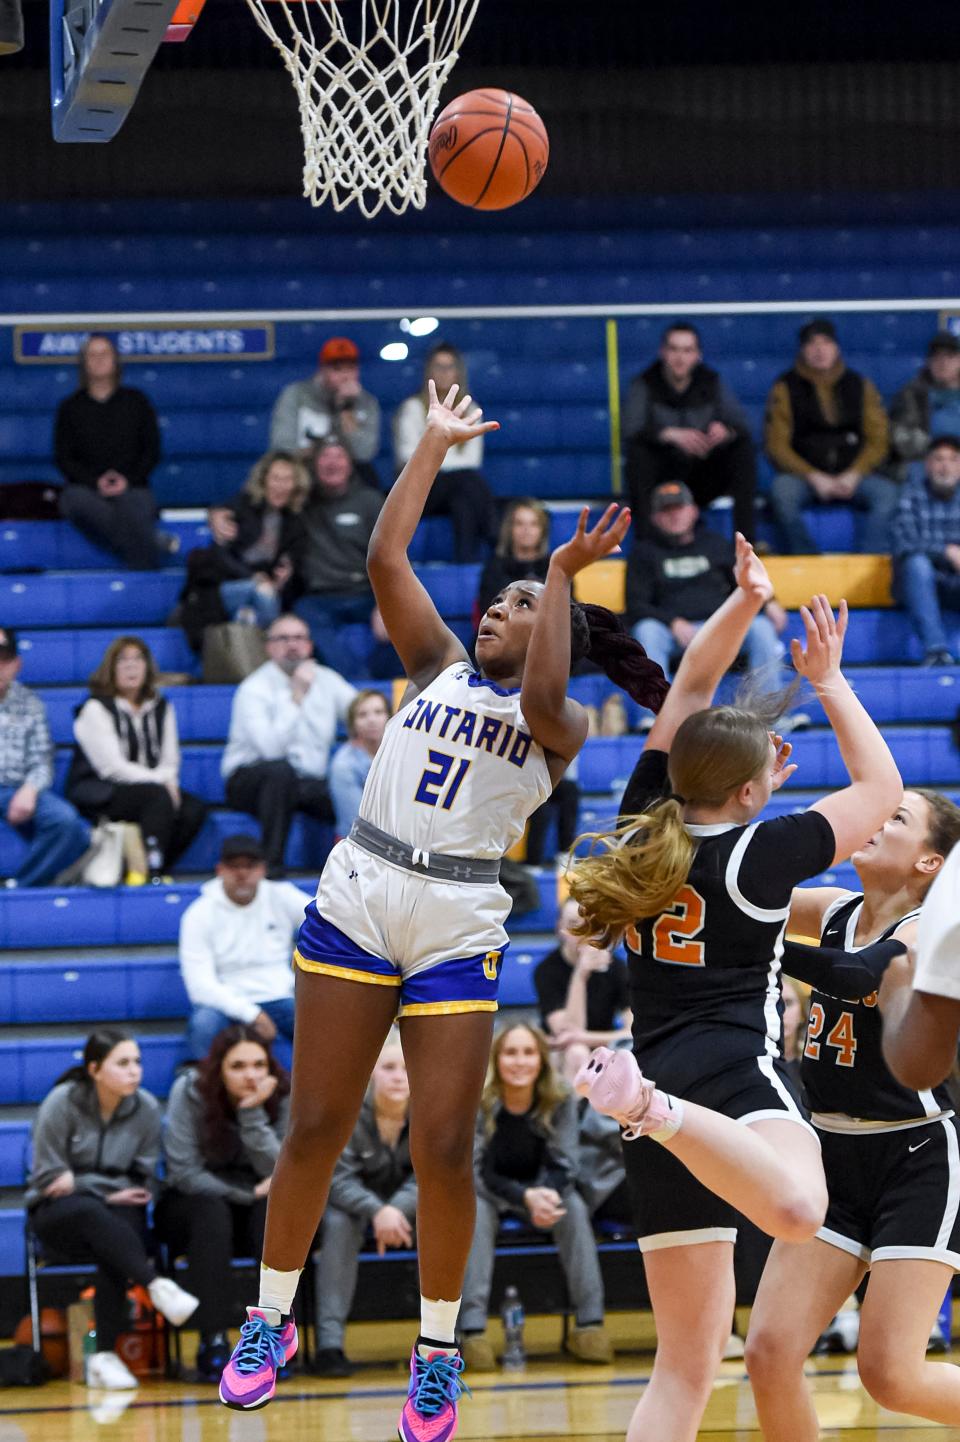 Ontario's Ka'Mashya Shaw played hero as the Warriors knocked off the Ashland Arrows on Thursday night in girls basketball action.